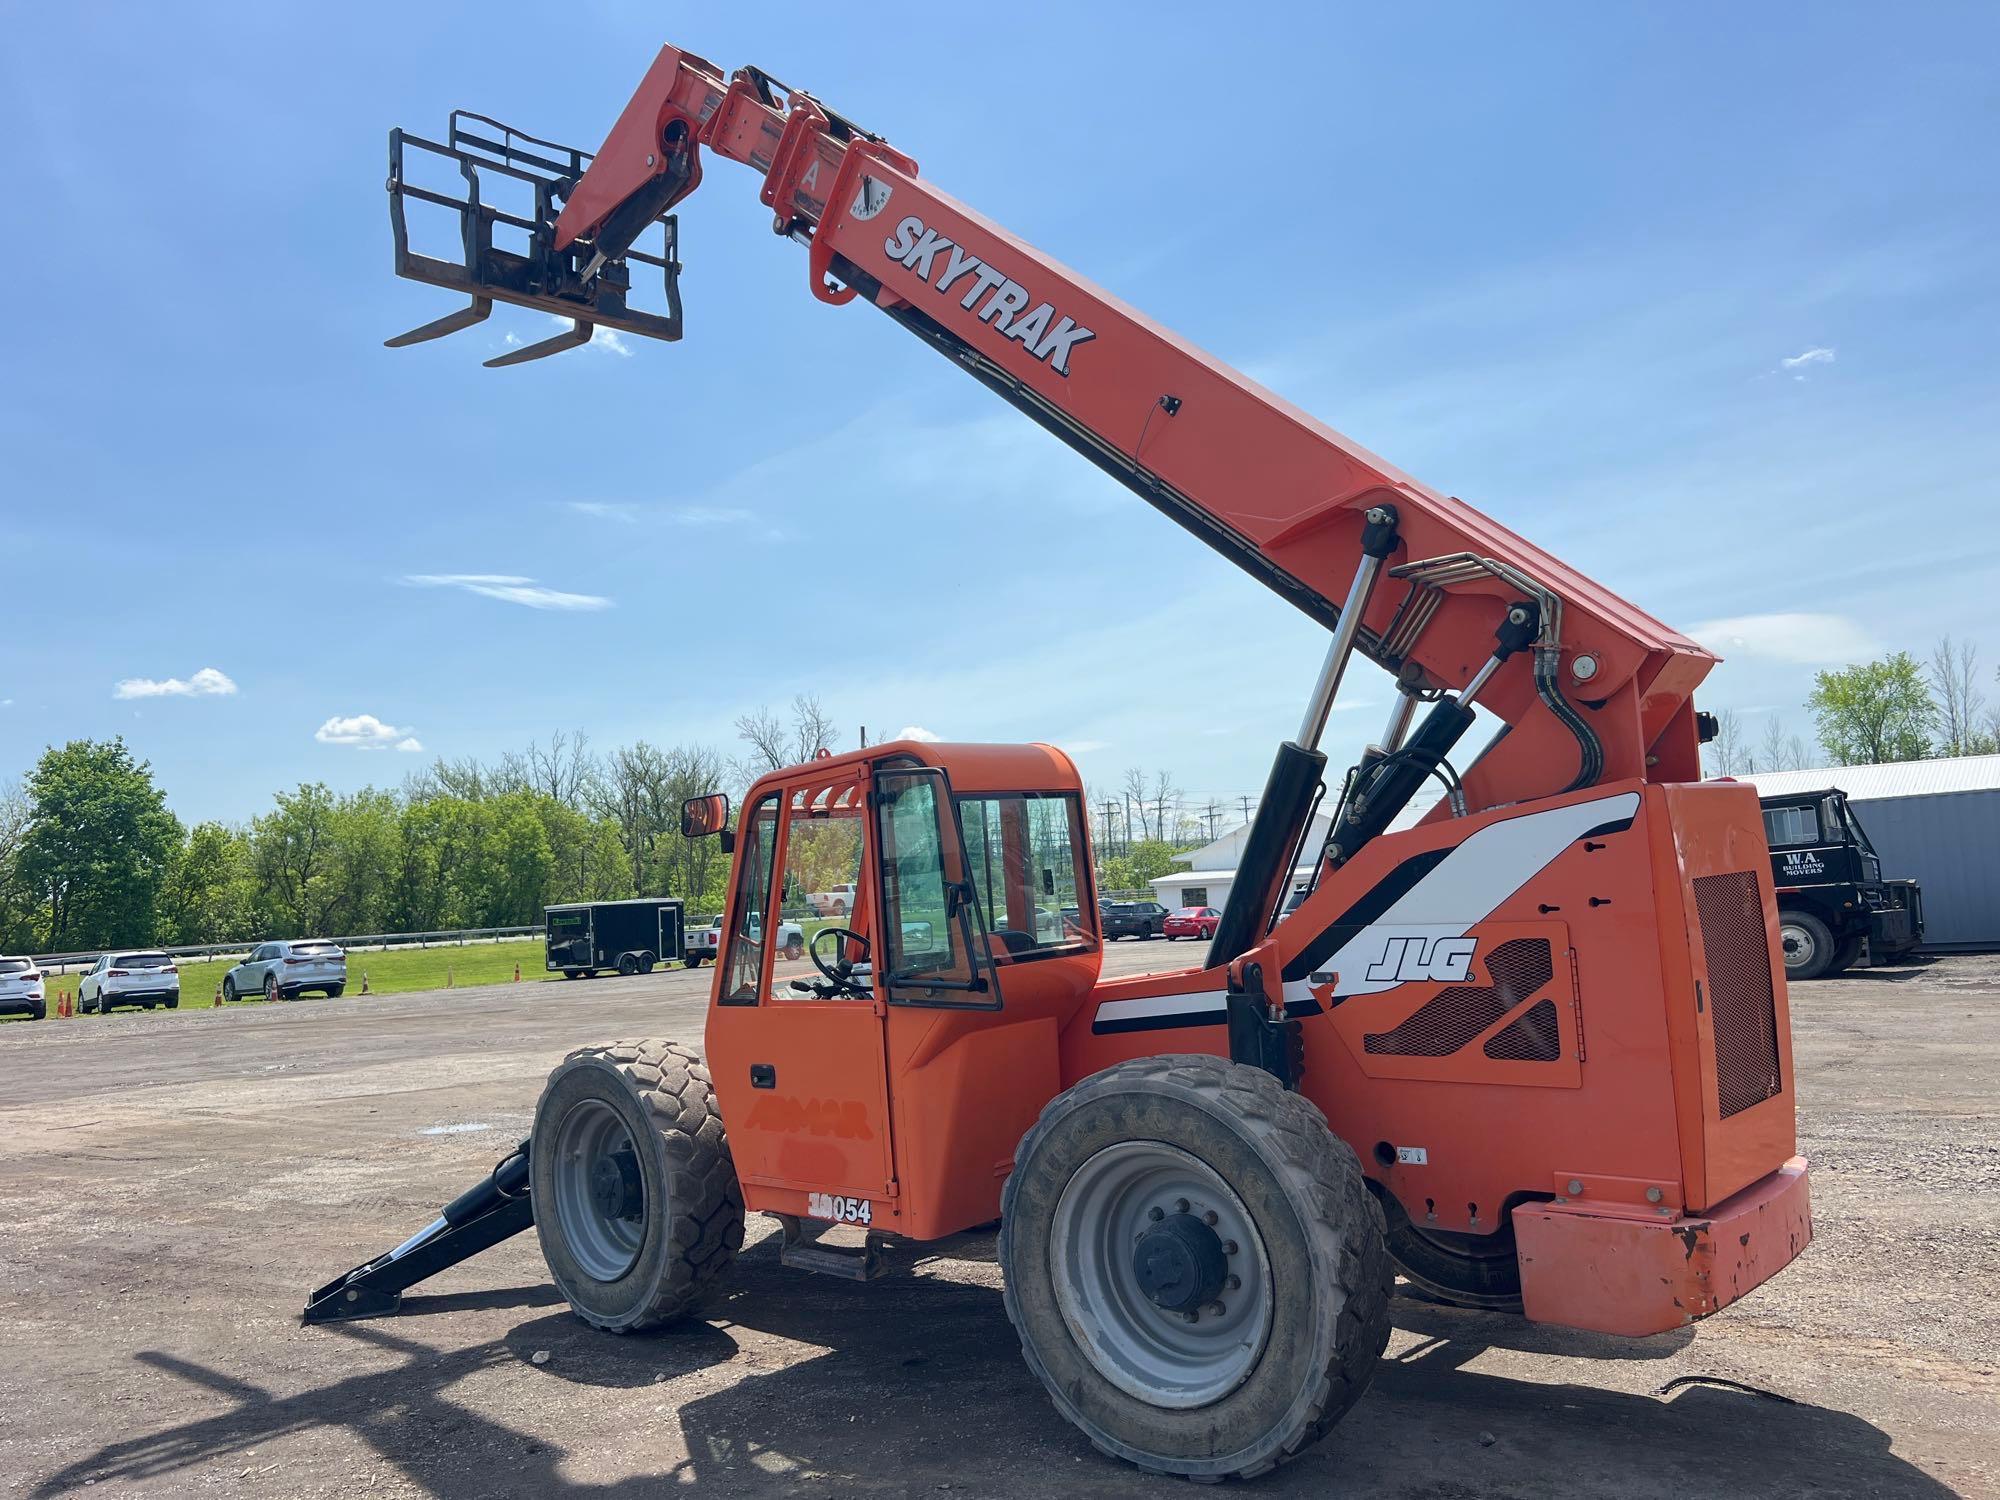 2015 SKYTRAK 10054 TELESCOPIC FORKLIFT SN-69410 4x4, powered by diesel engine, equipped with EROPS,